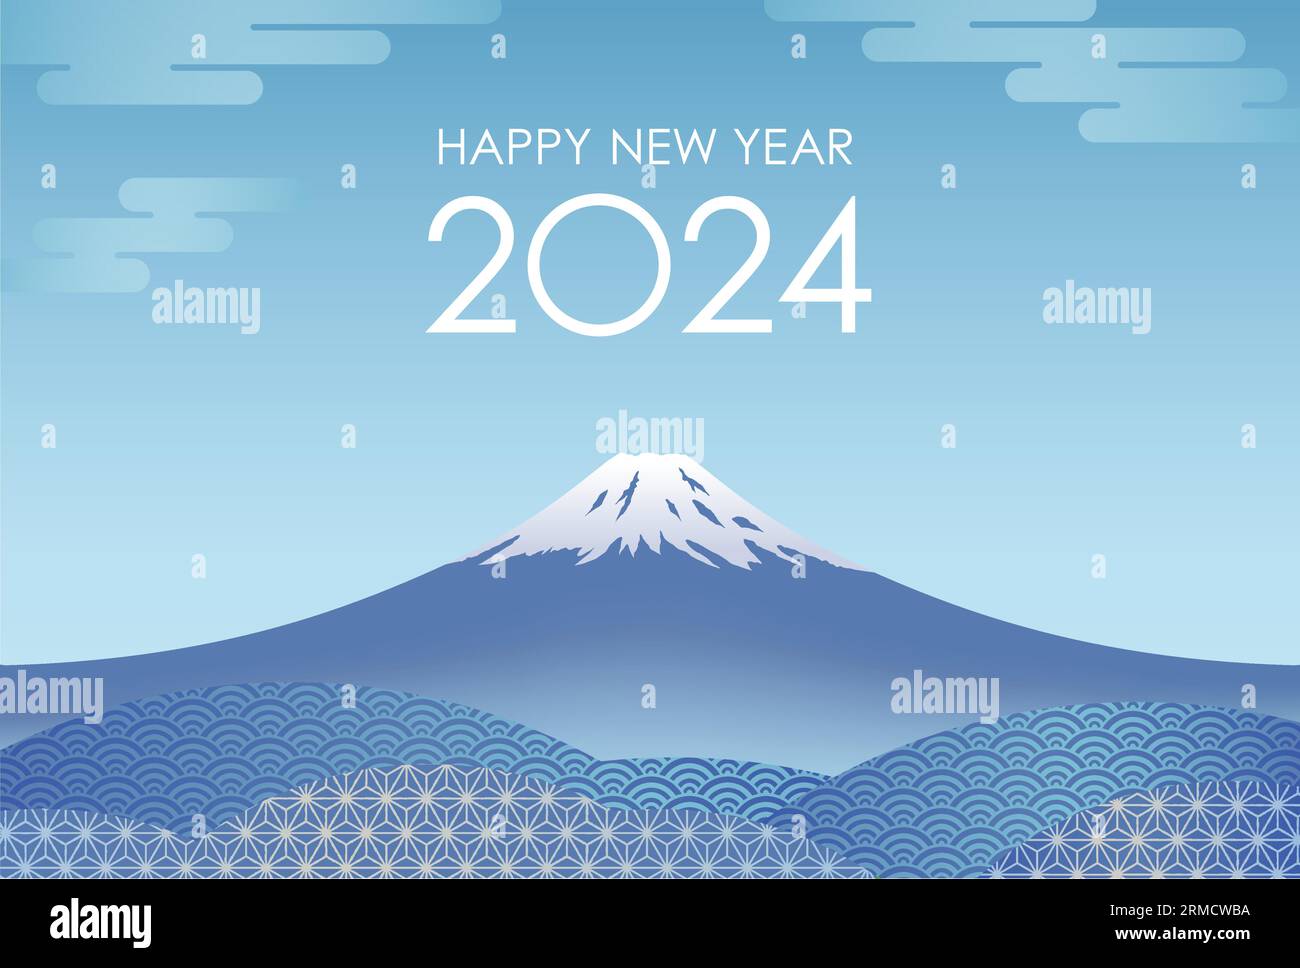 2024 New Year’s Vector Template With Blue Mt. Fuji Decorated With Vintage Japanese Patterns. Stock Vector